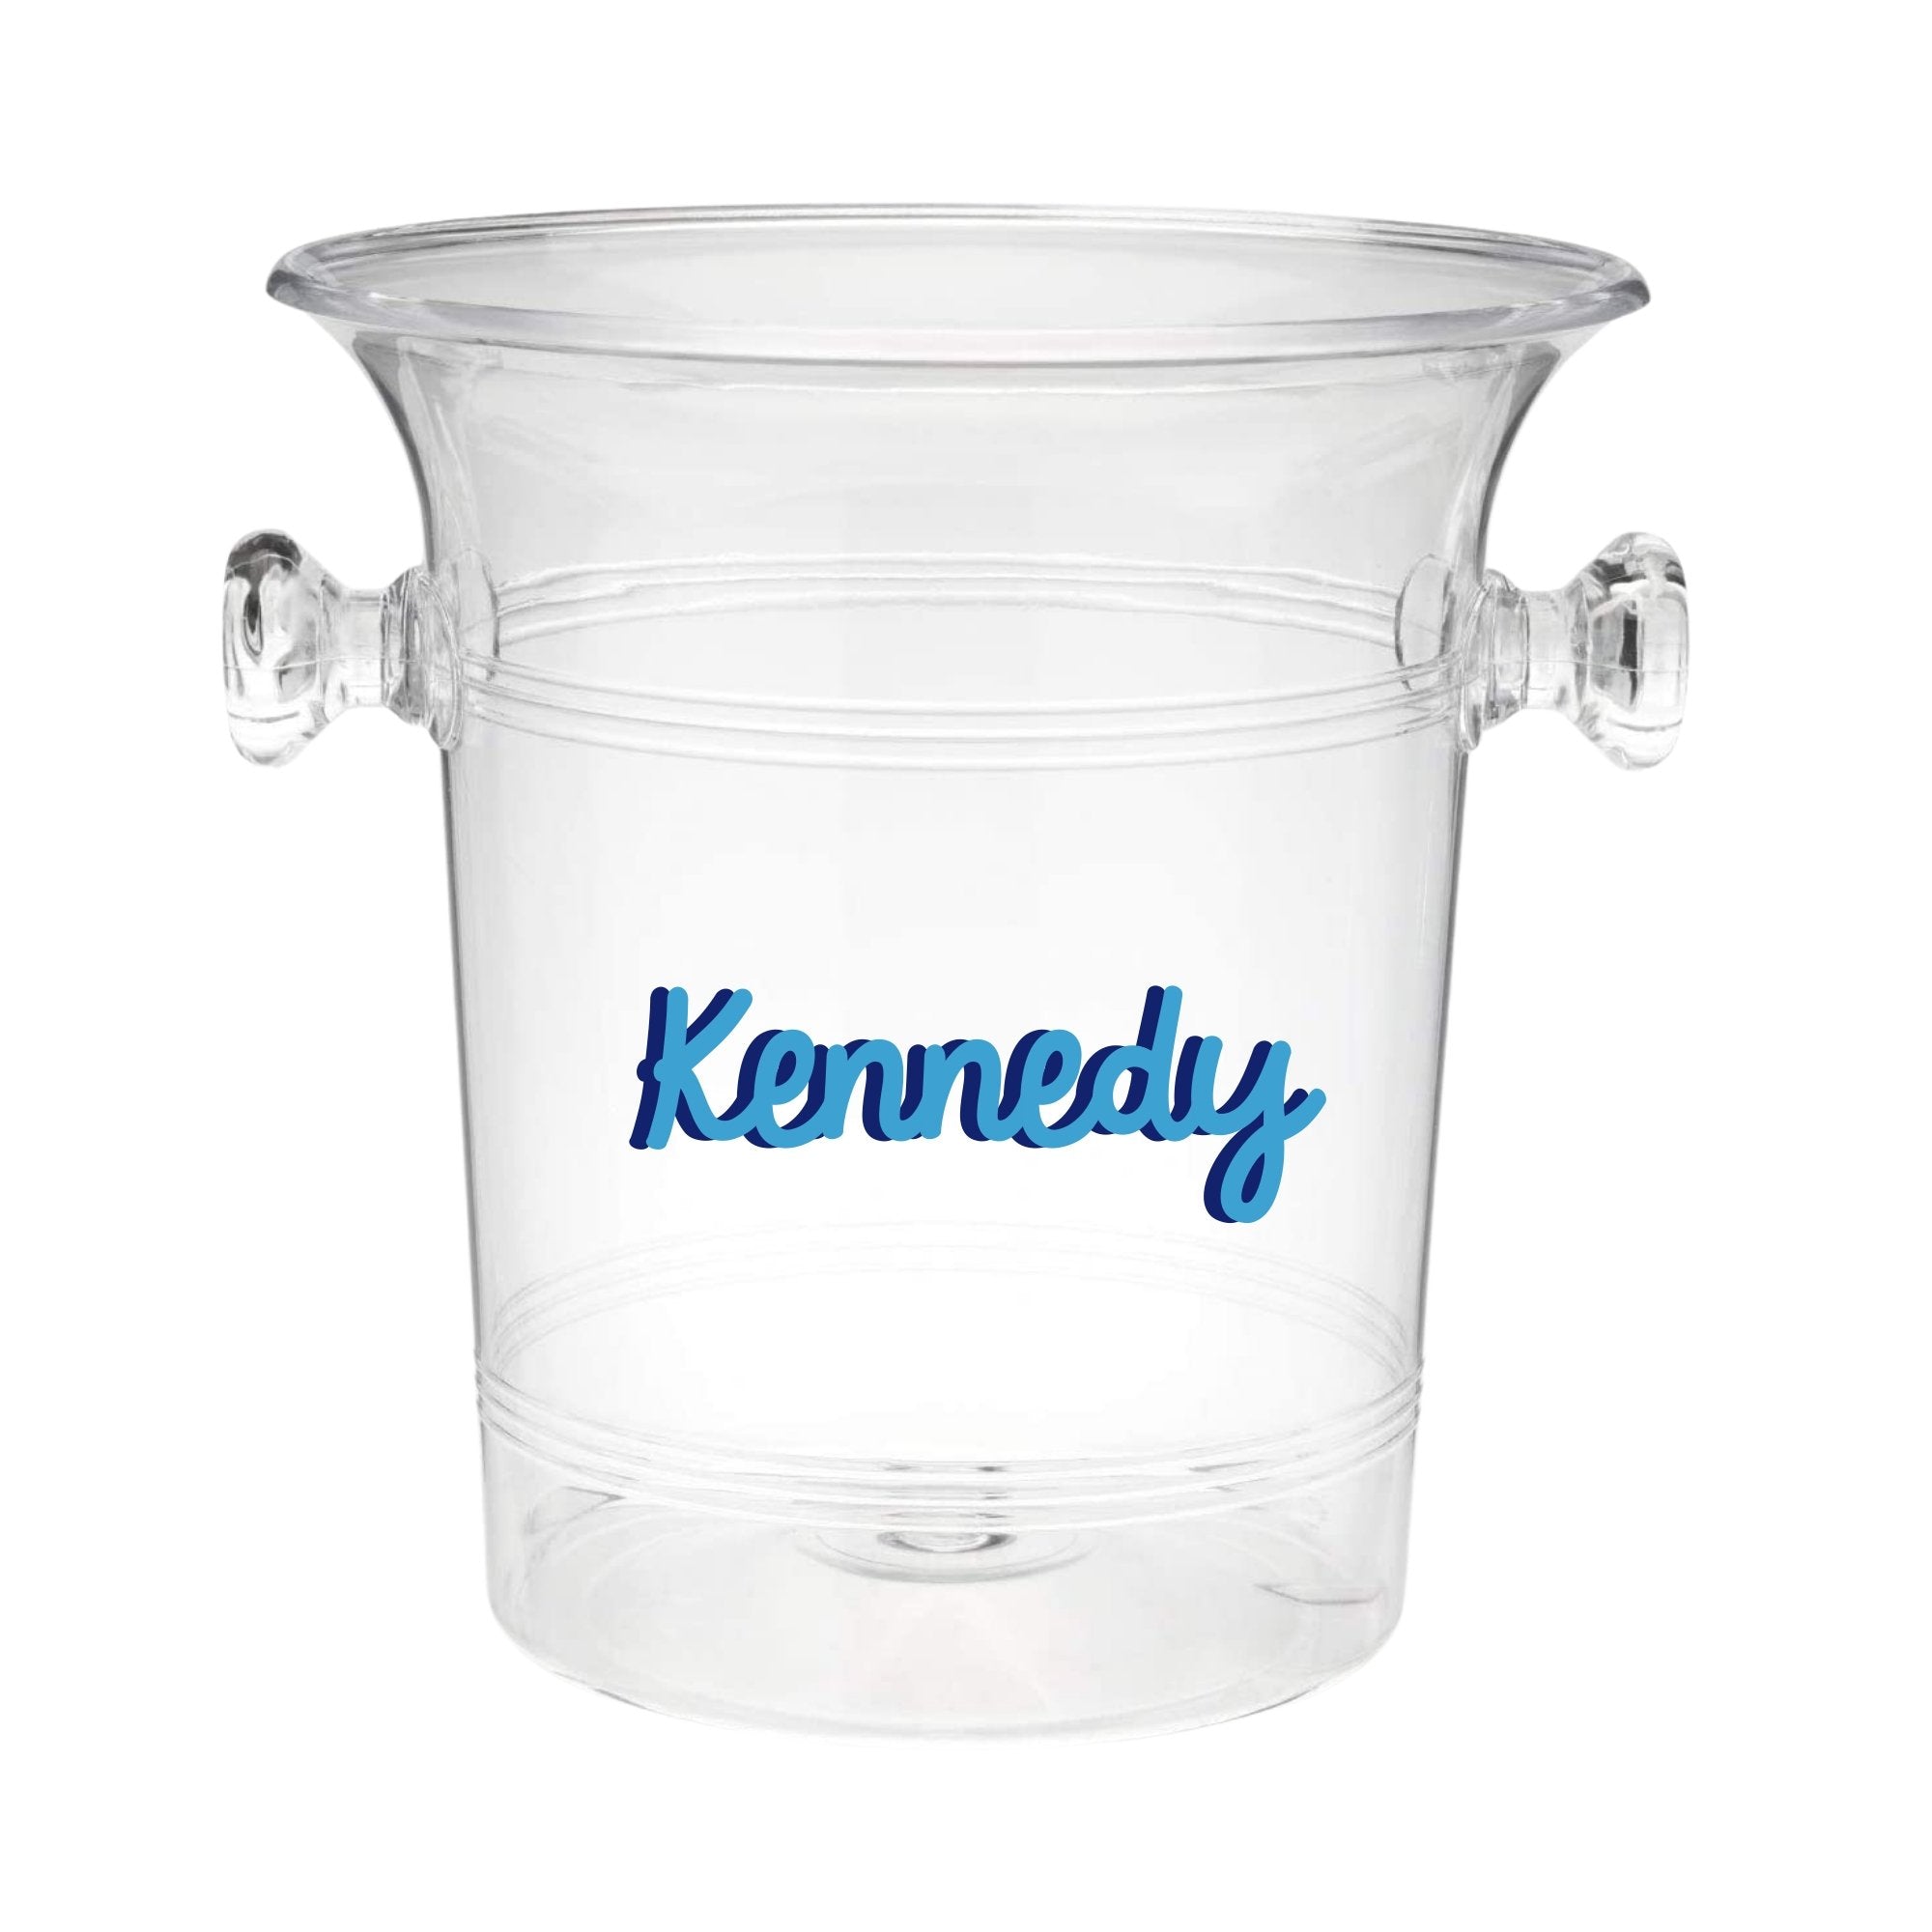 A clear ice bucket with "Murphy" on the front in pink cursive